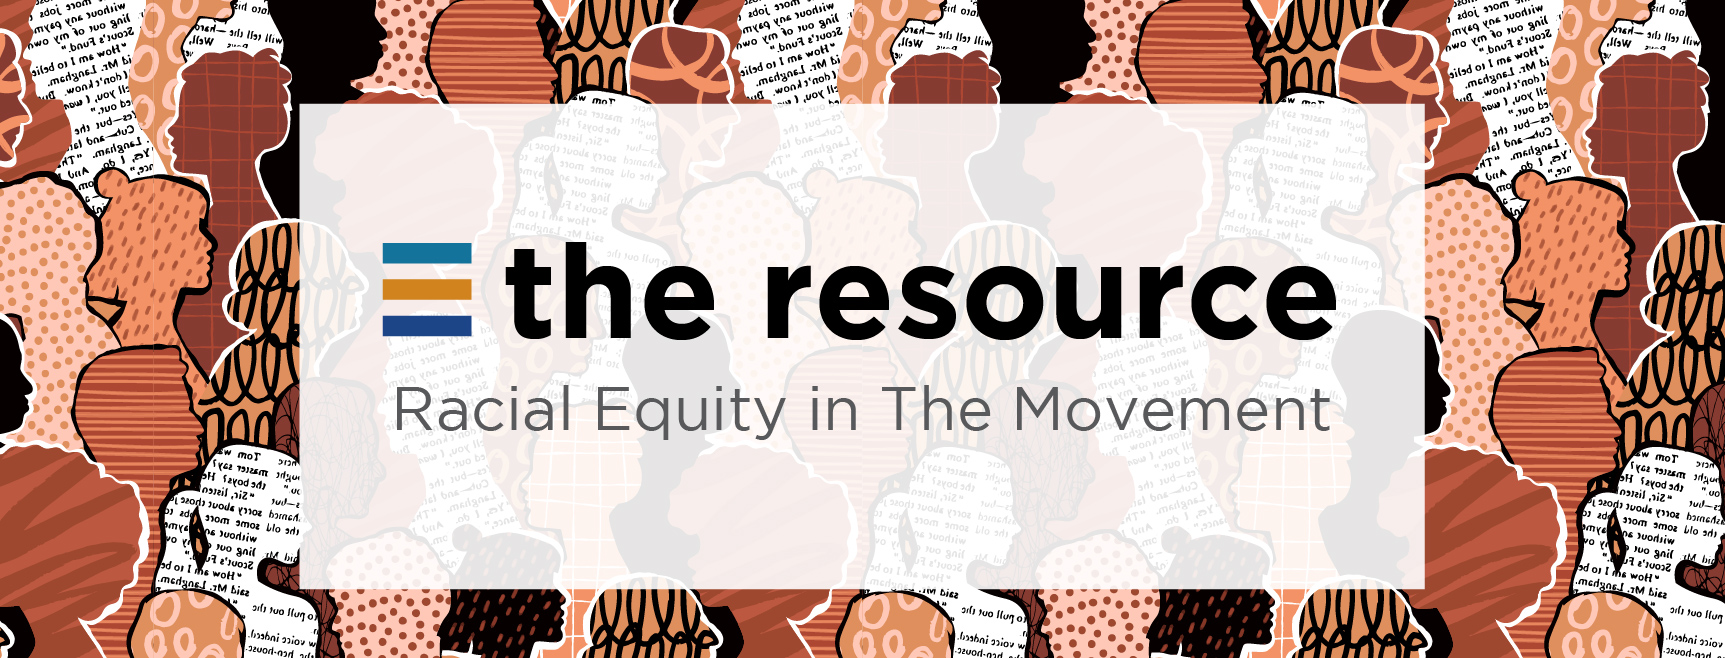 The Resource: Racial Equity in the Movement